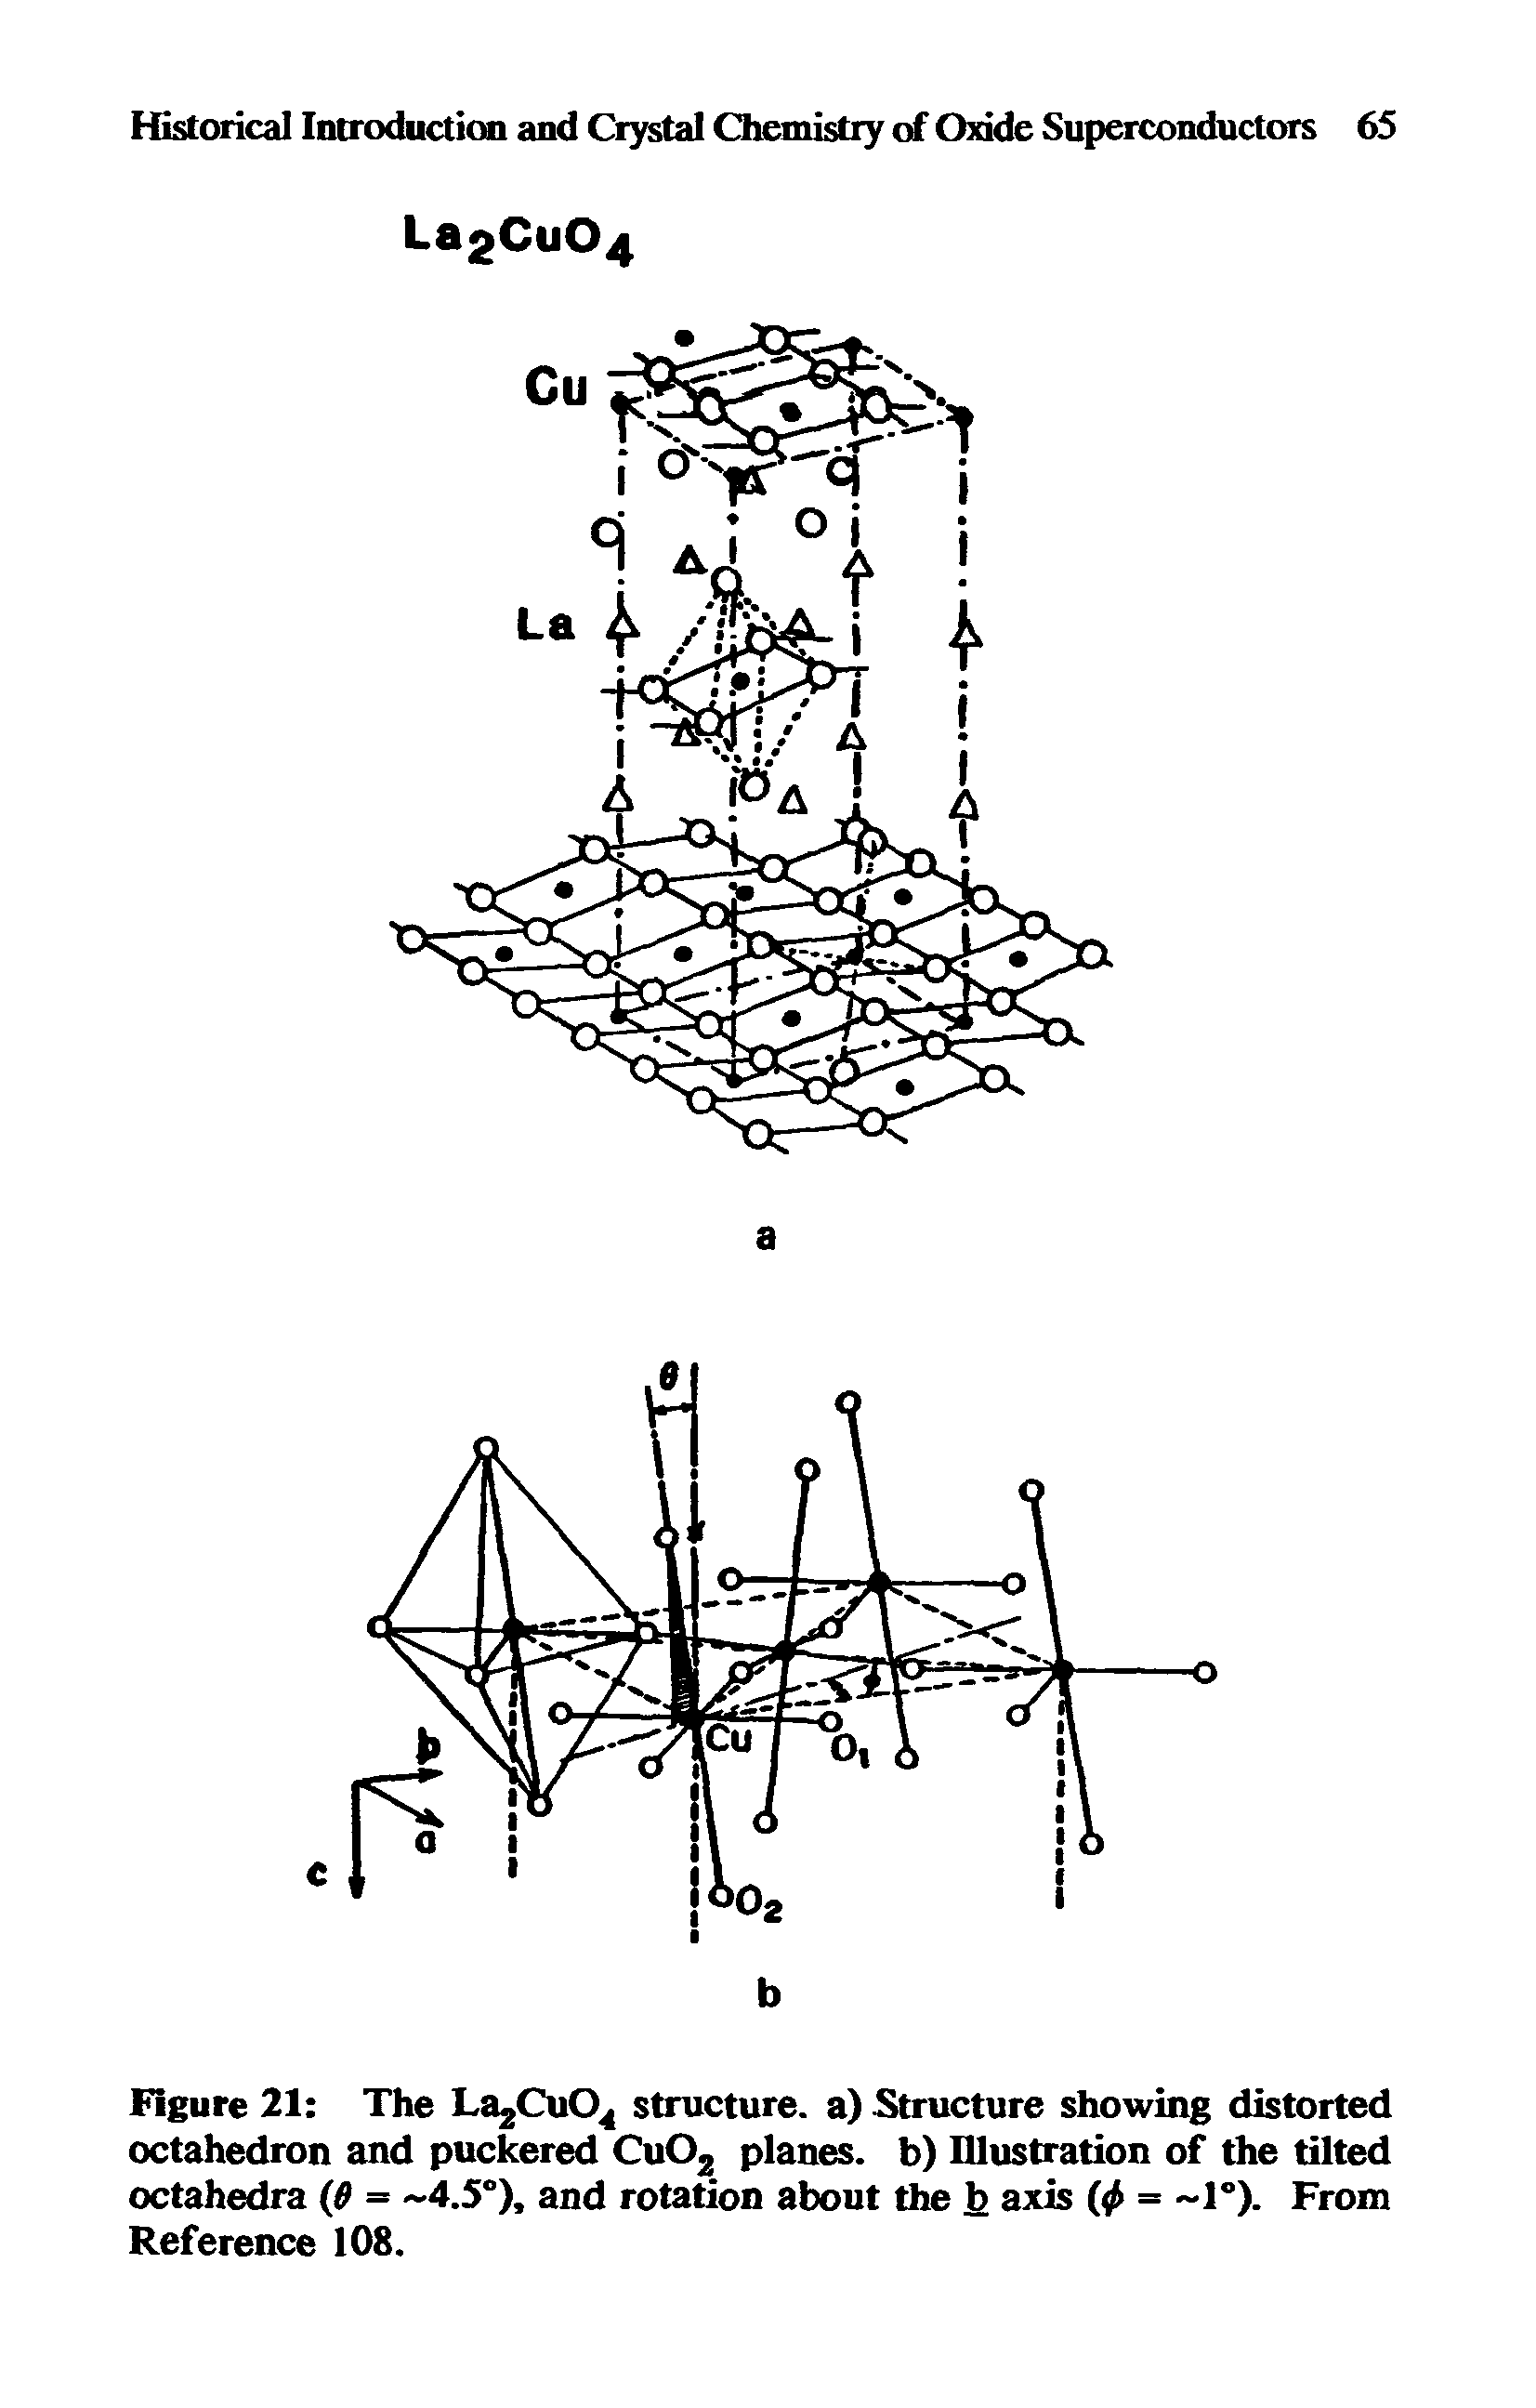 Figure 21 The La2Cu04 structure, a) Structure showing distorted octahedron and puckered CuOz planes, b) Illustration of the tilted octahedra (0 = 4.5°), and rotation about the b axis = 1°). From Reference 108.